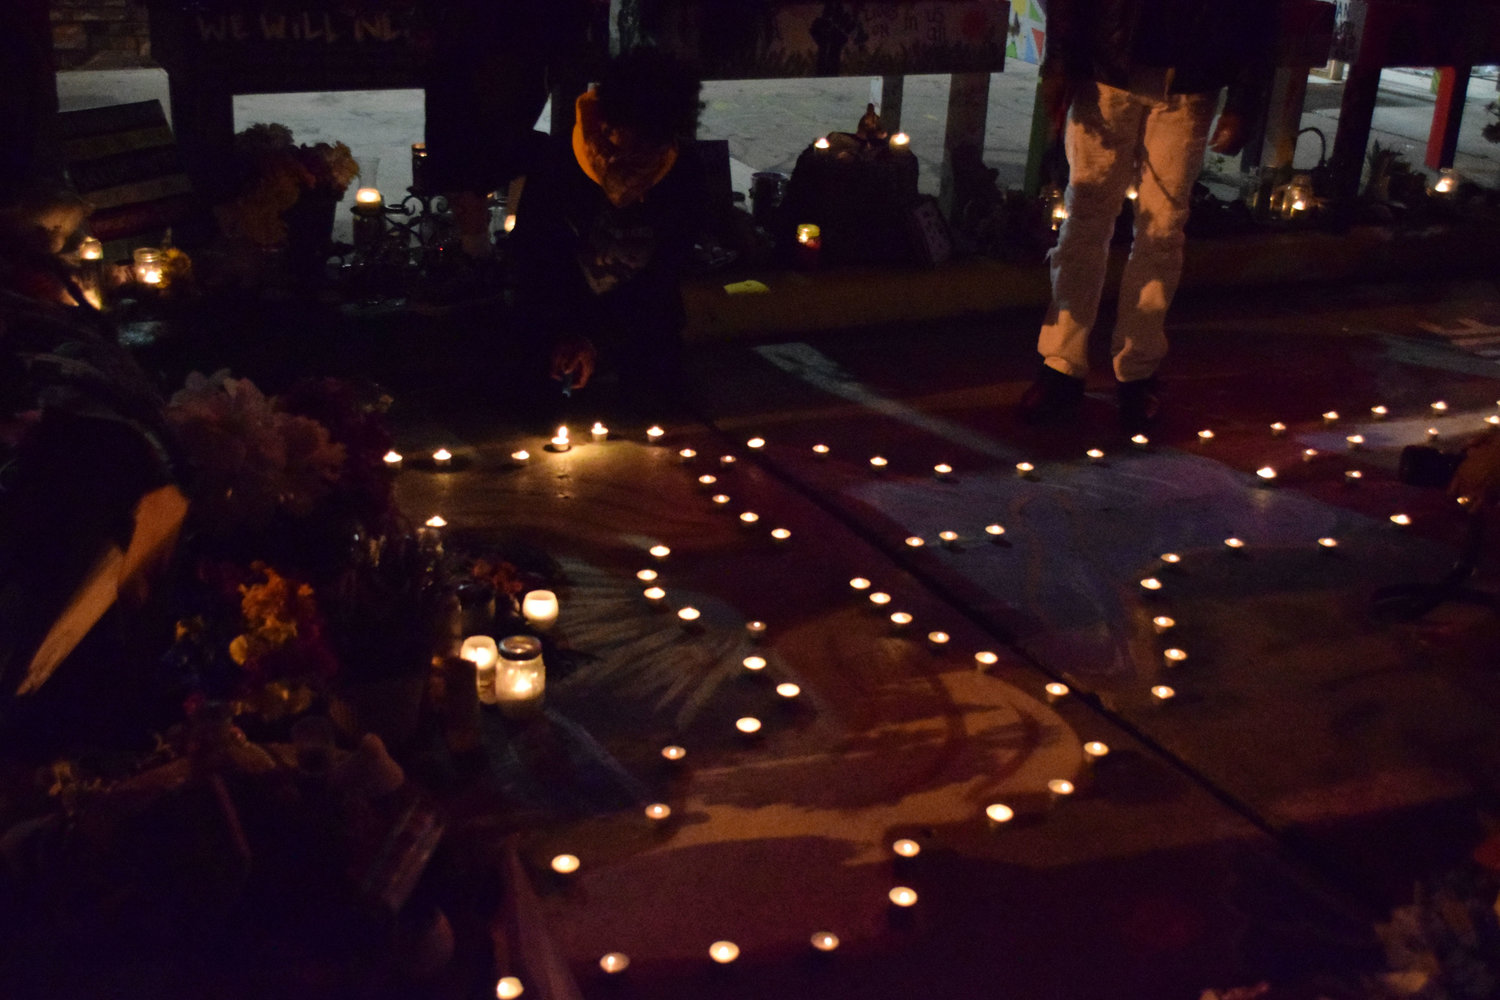 Community members place candles around the angel painted on the street in front of Cup Foods.